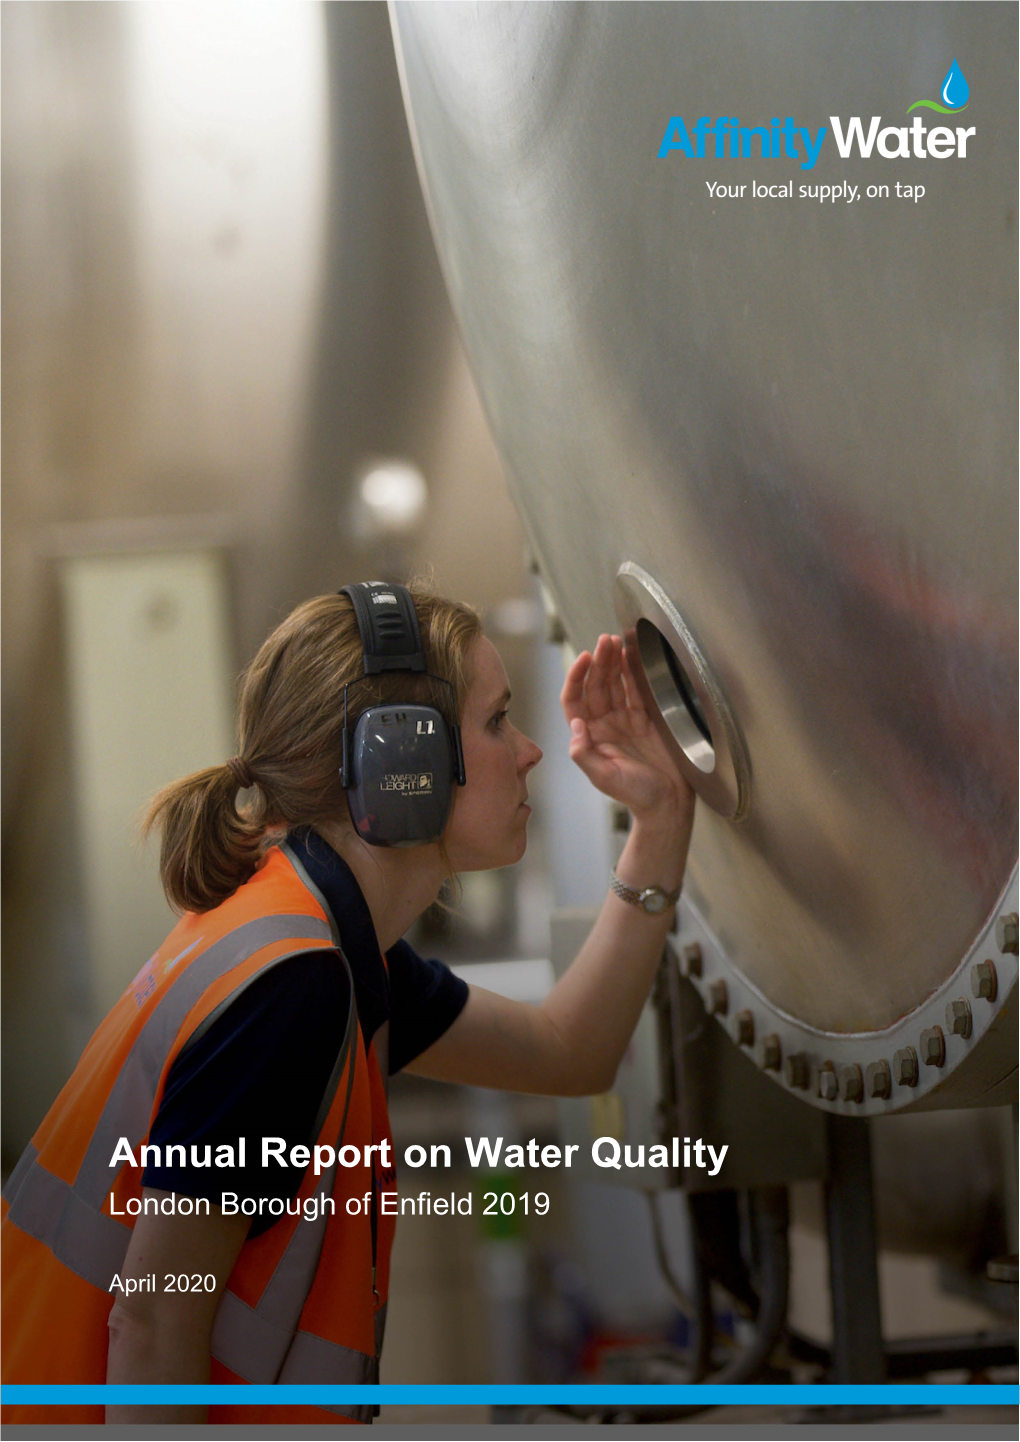 Annual Report on Water Quality London Borough of Enfield 2019